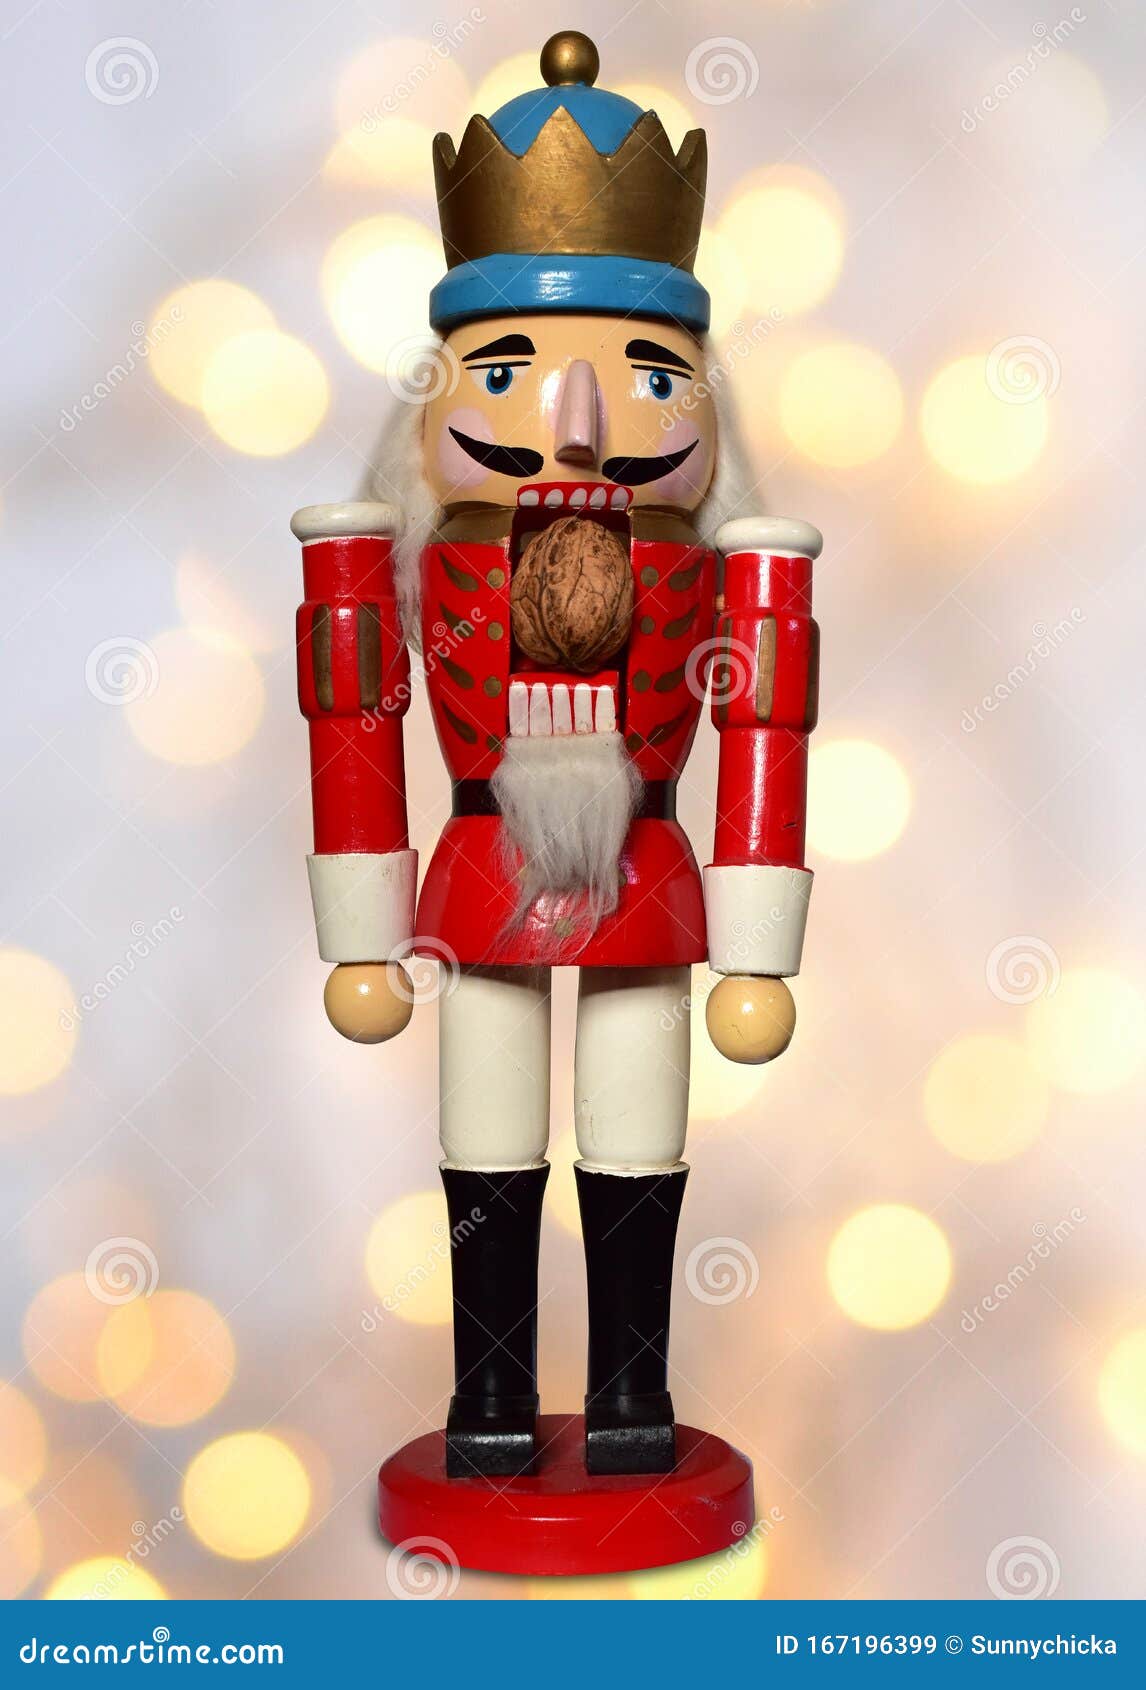 Nutcracker German Isolated Soldier Figure Christmas Decoration ...